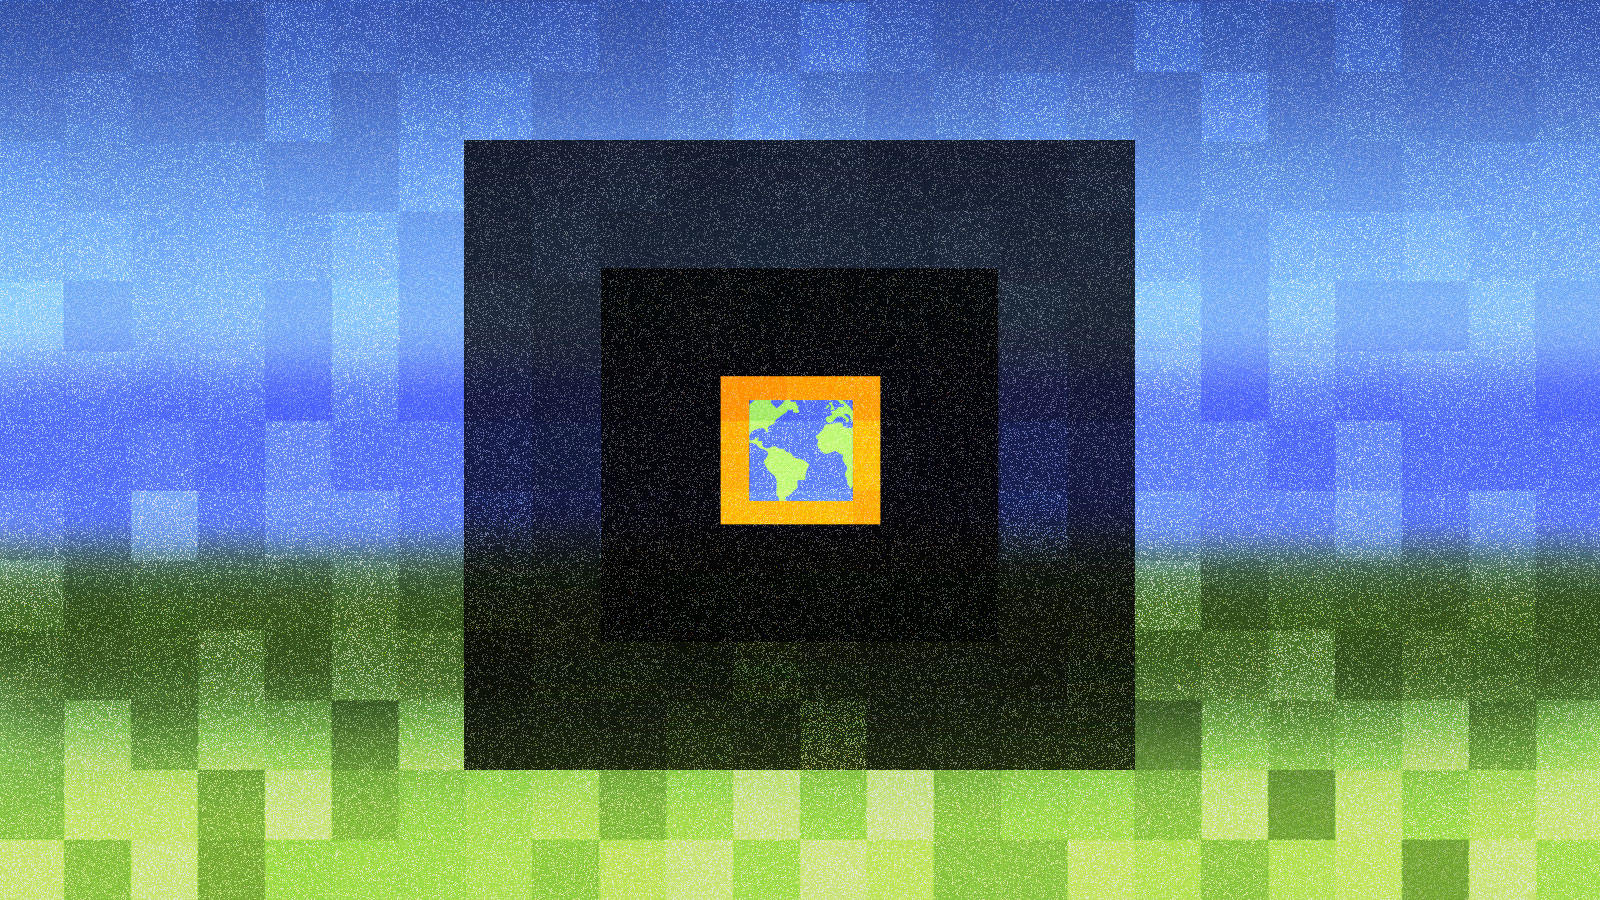 Pixelated illustration of square-shaped earth within a black square